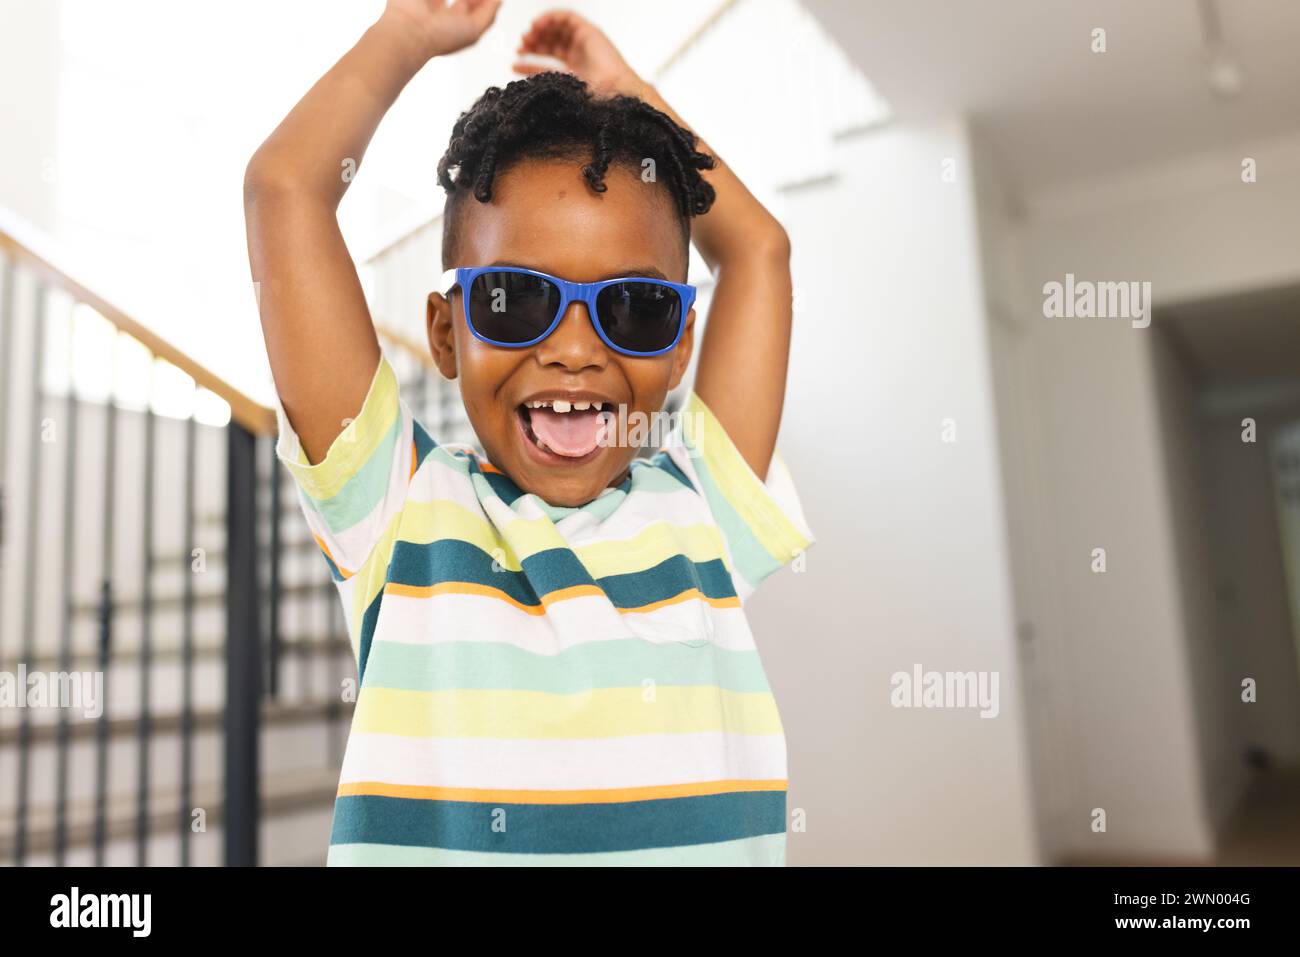 African American boy wears blue sunglasses and a striped shirt, arms raised in excitement Stock Photo